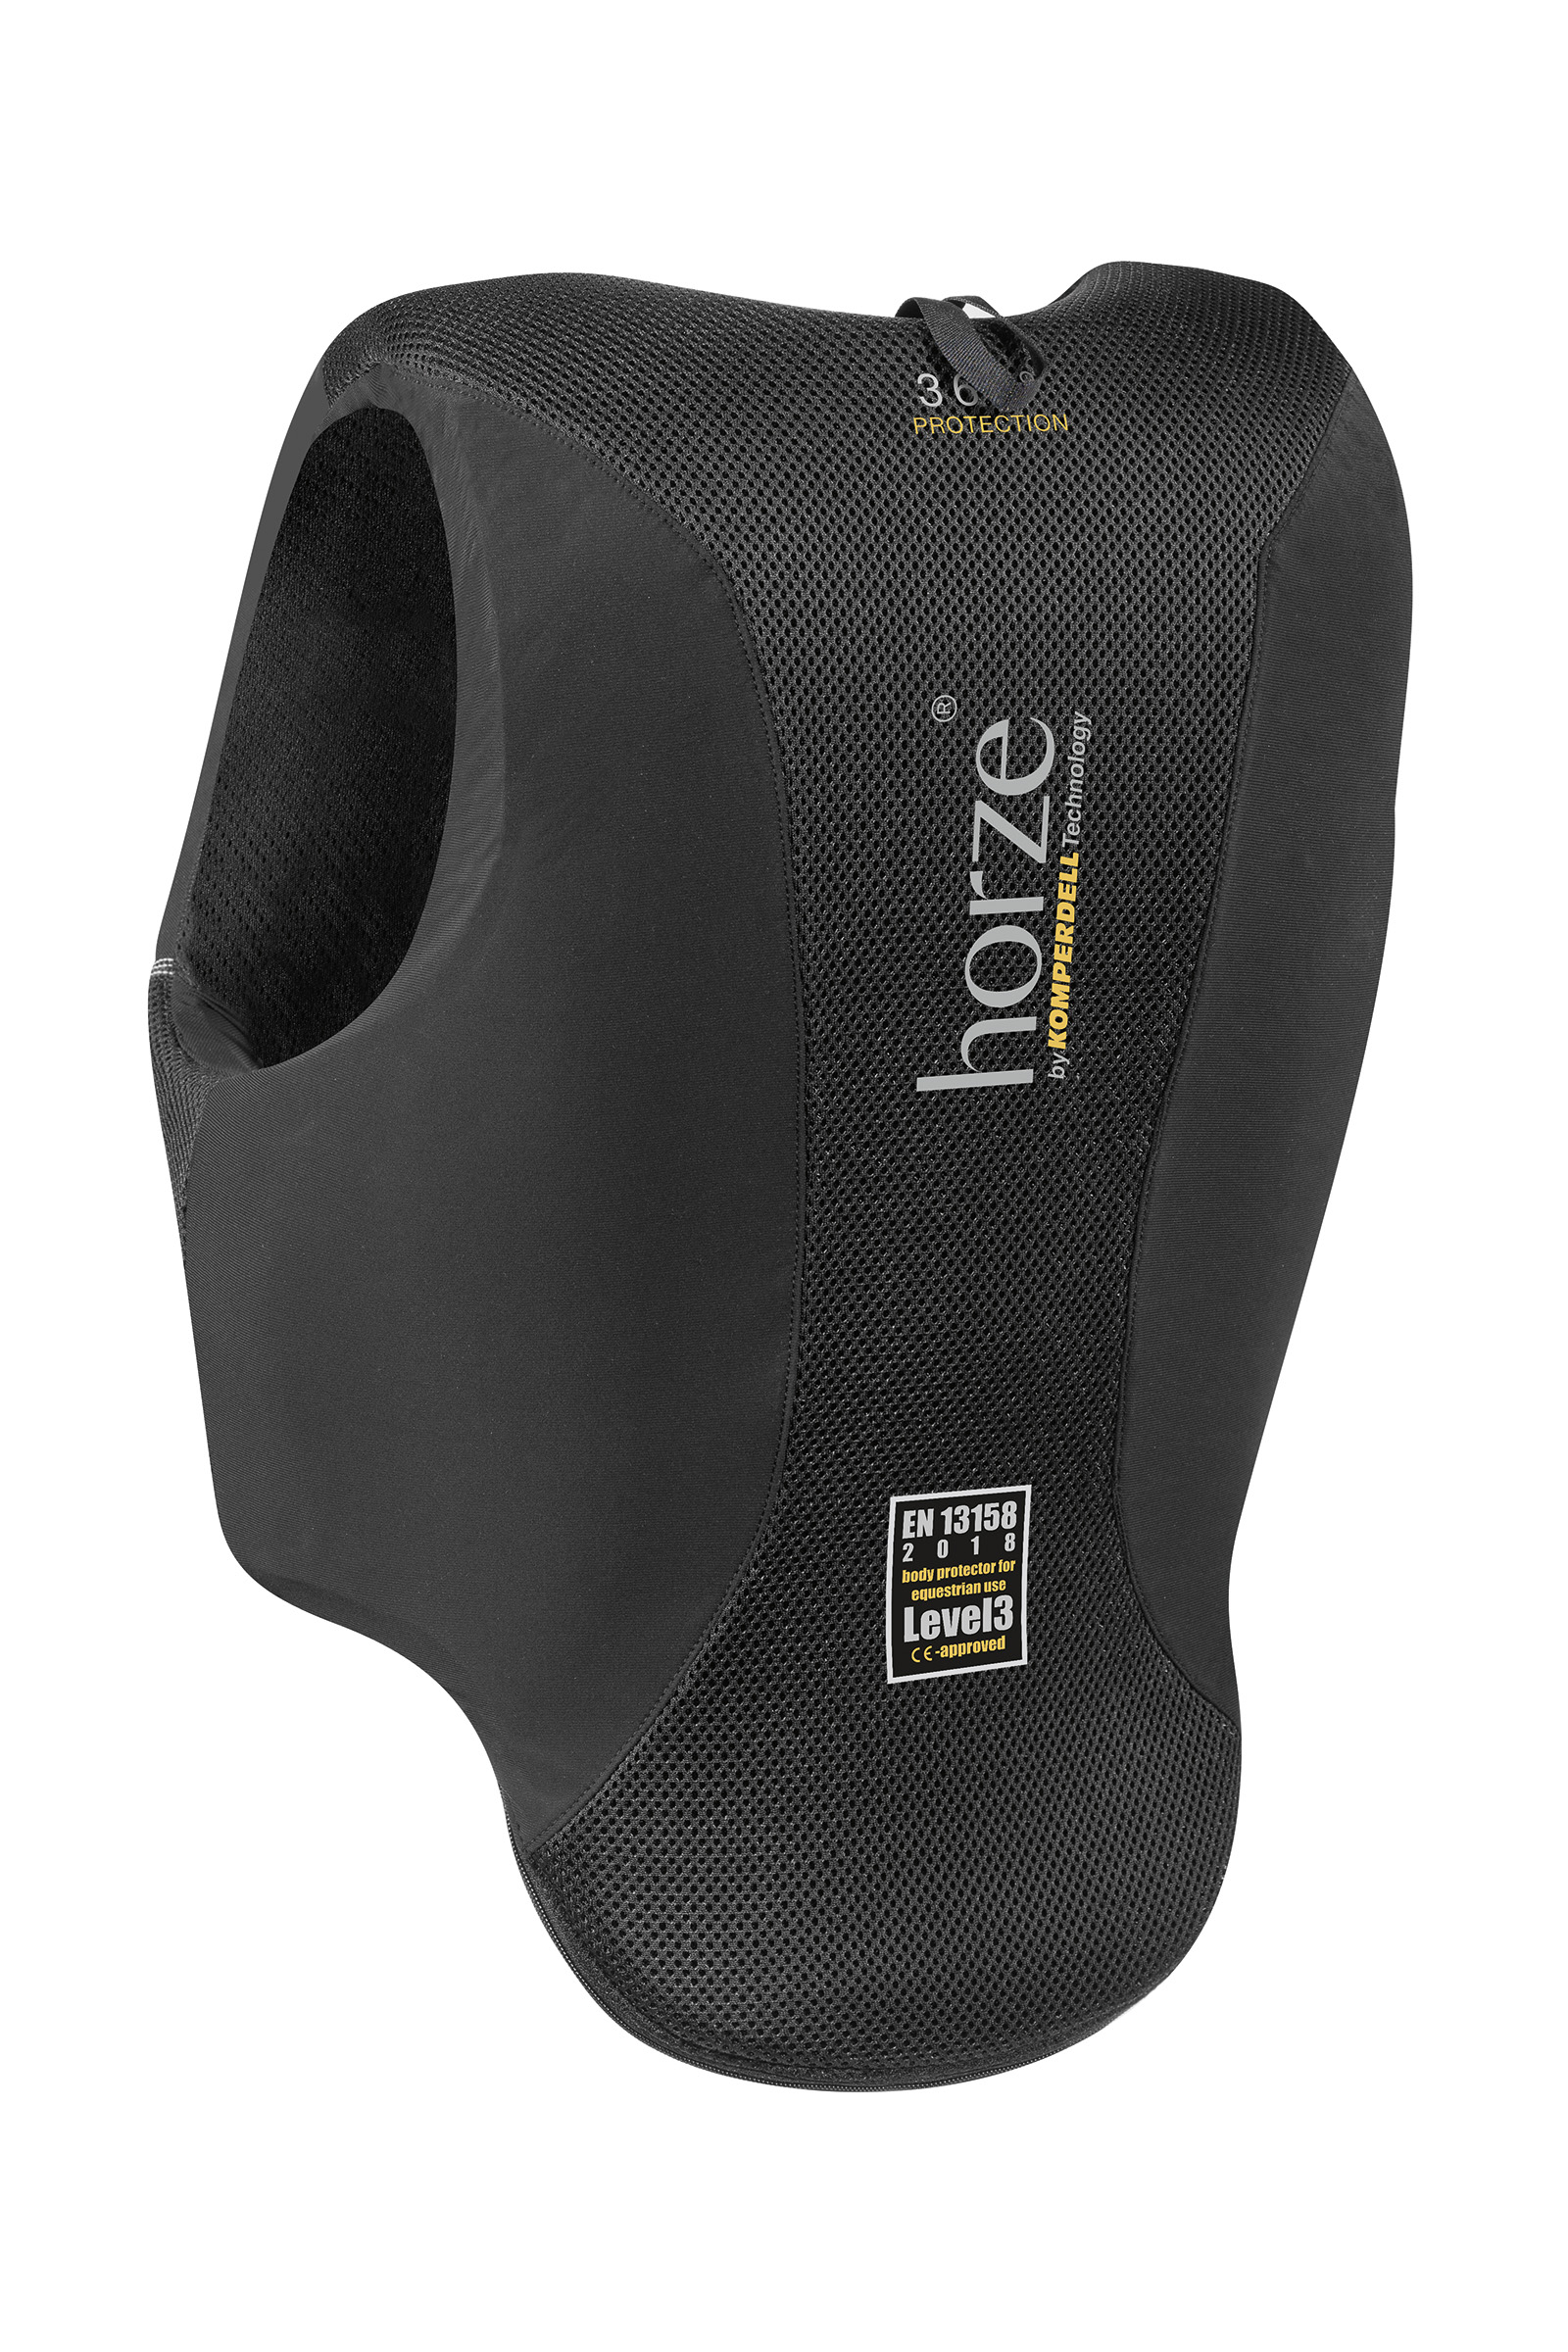 Horse Riding Body Protectors & Safety Vests